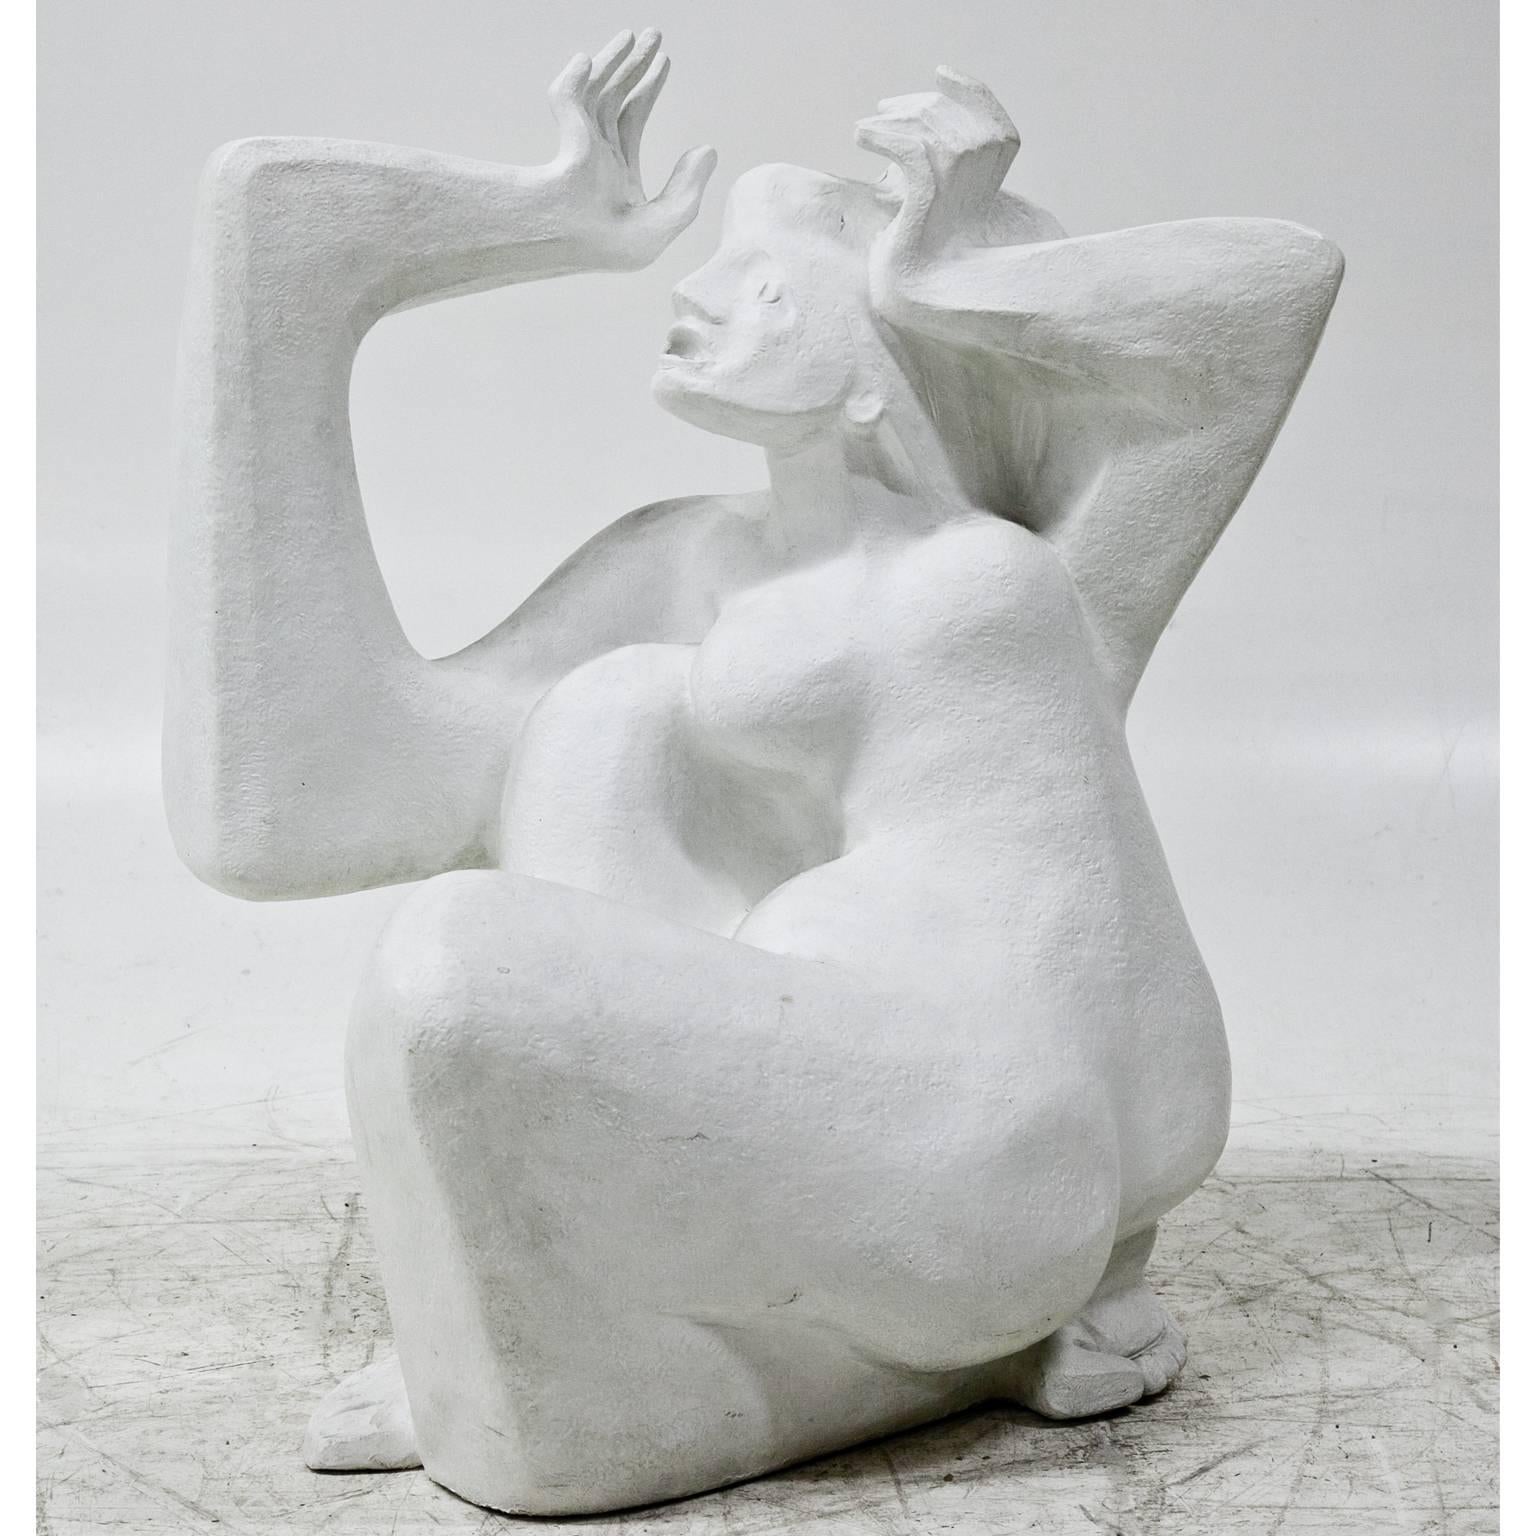 Expressionistic plaster figure of a crouching female with wide-open eyes and an open mouth, the arms are geometrically shaped and rise to her head in an ecstatic state. The white, rough surface shows some signs of wear. The sculpture is not signed